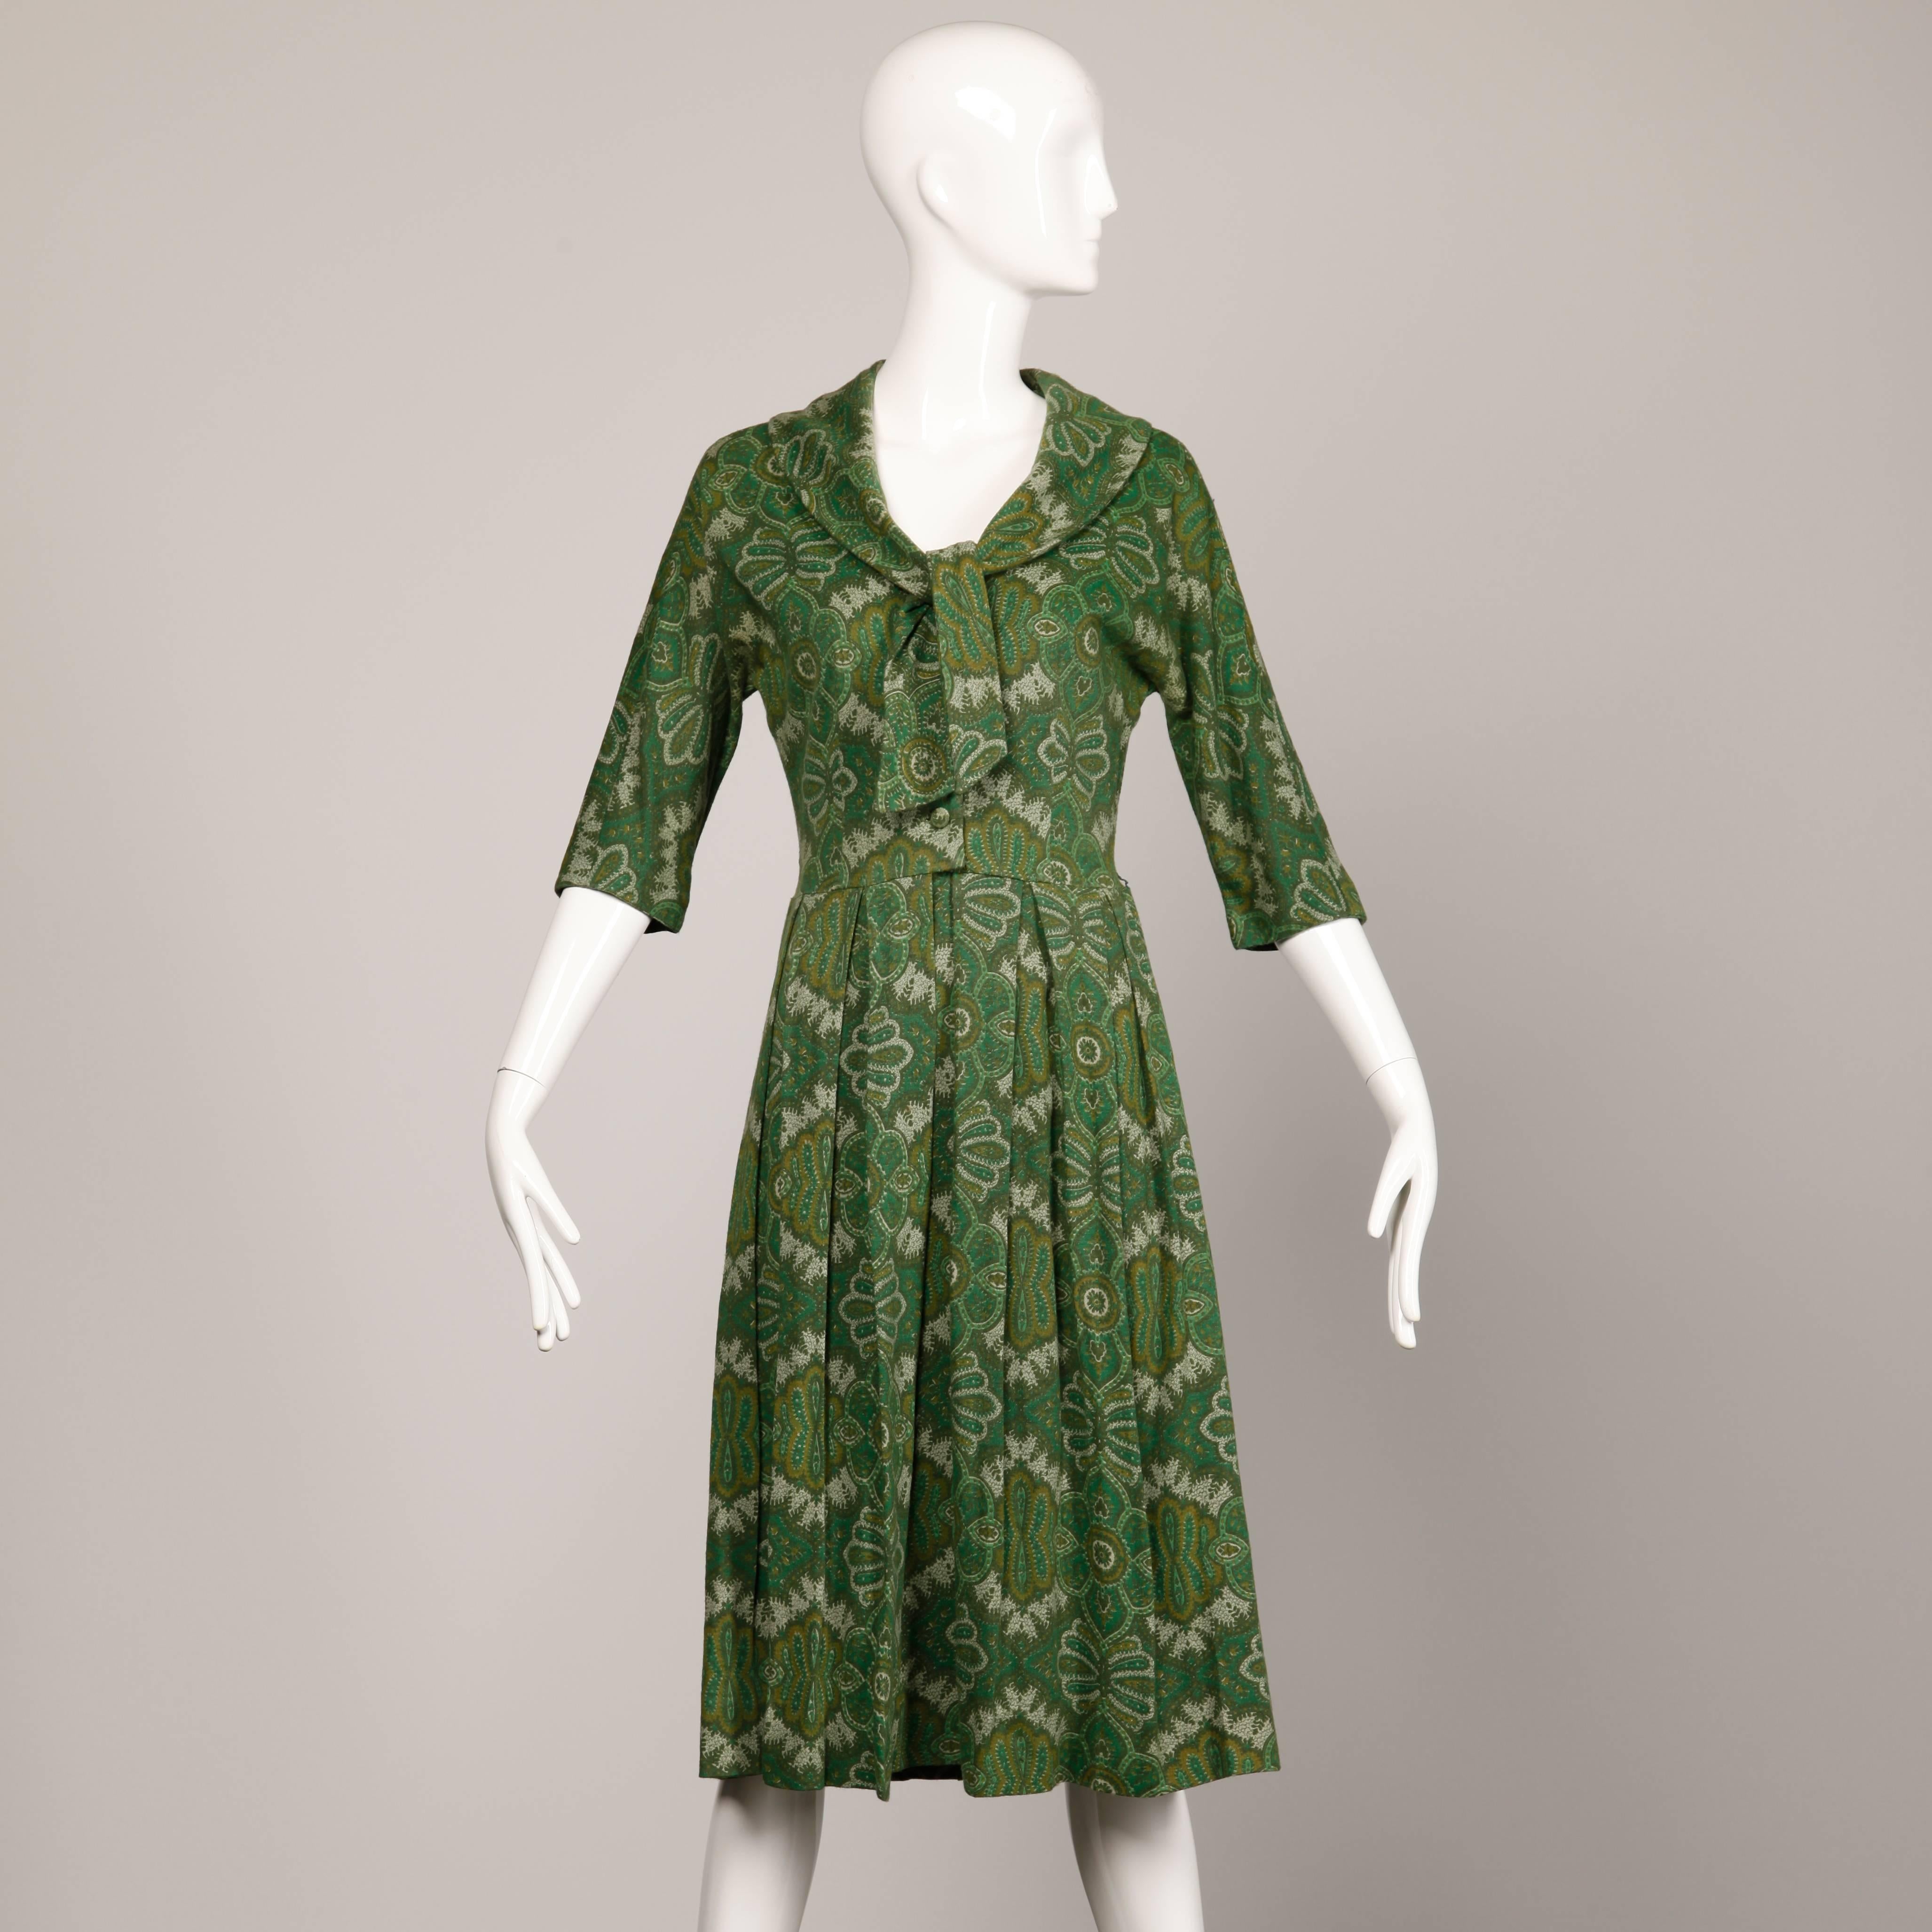 Vintage 1950s green paisley wool day dress with an ascot tie. Unlined with front button and snap closure. Fits like a modern size small. The bust measures 34